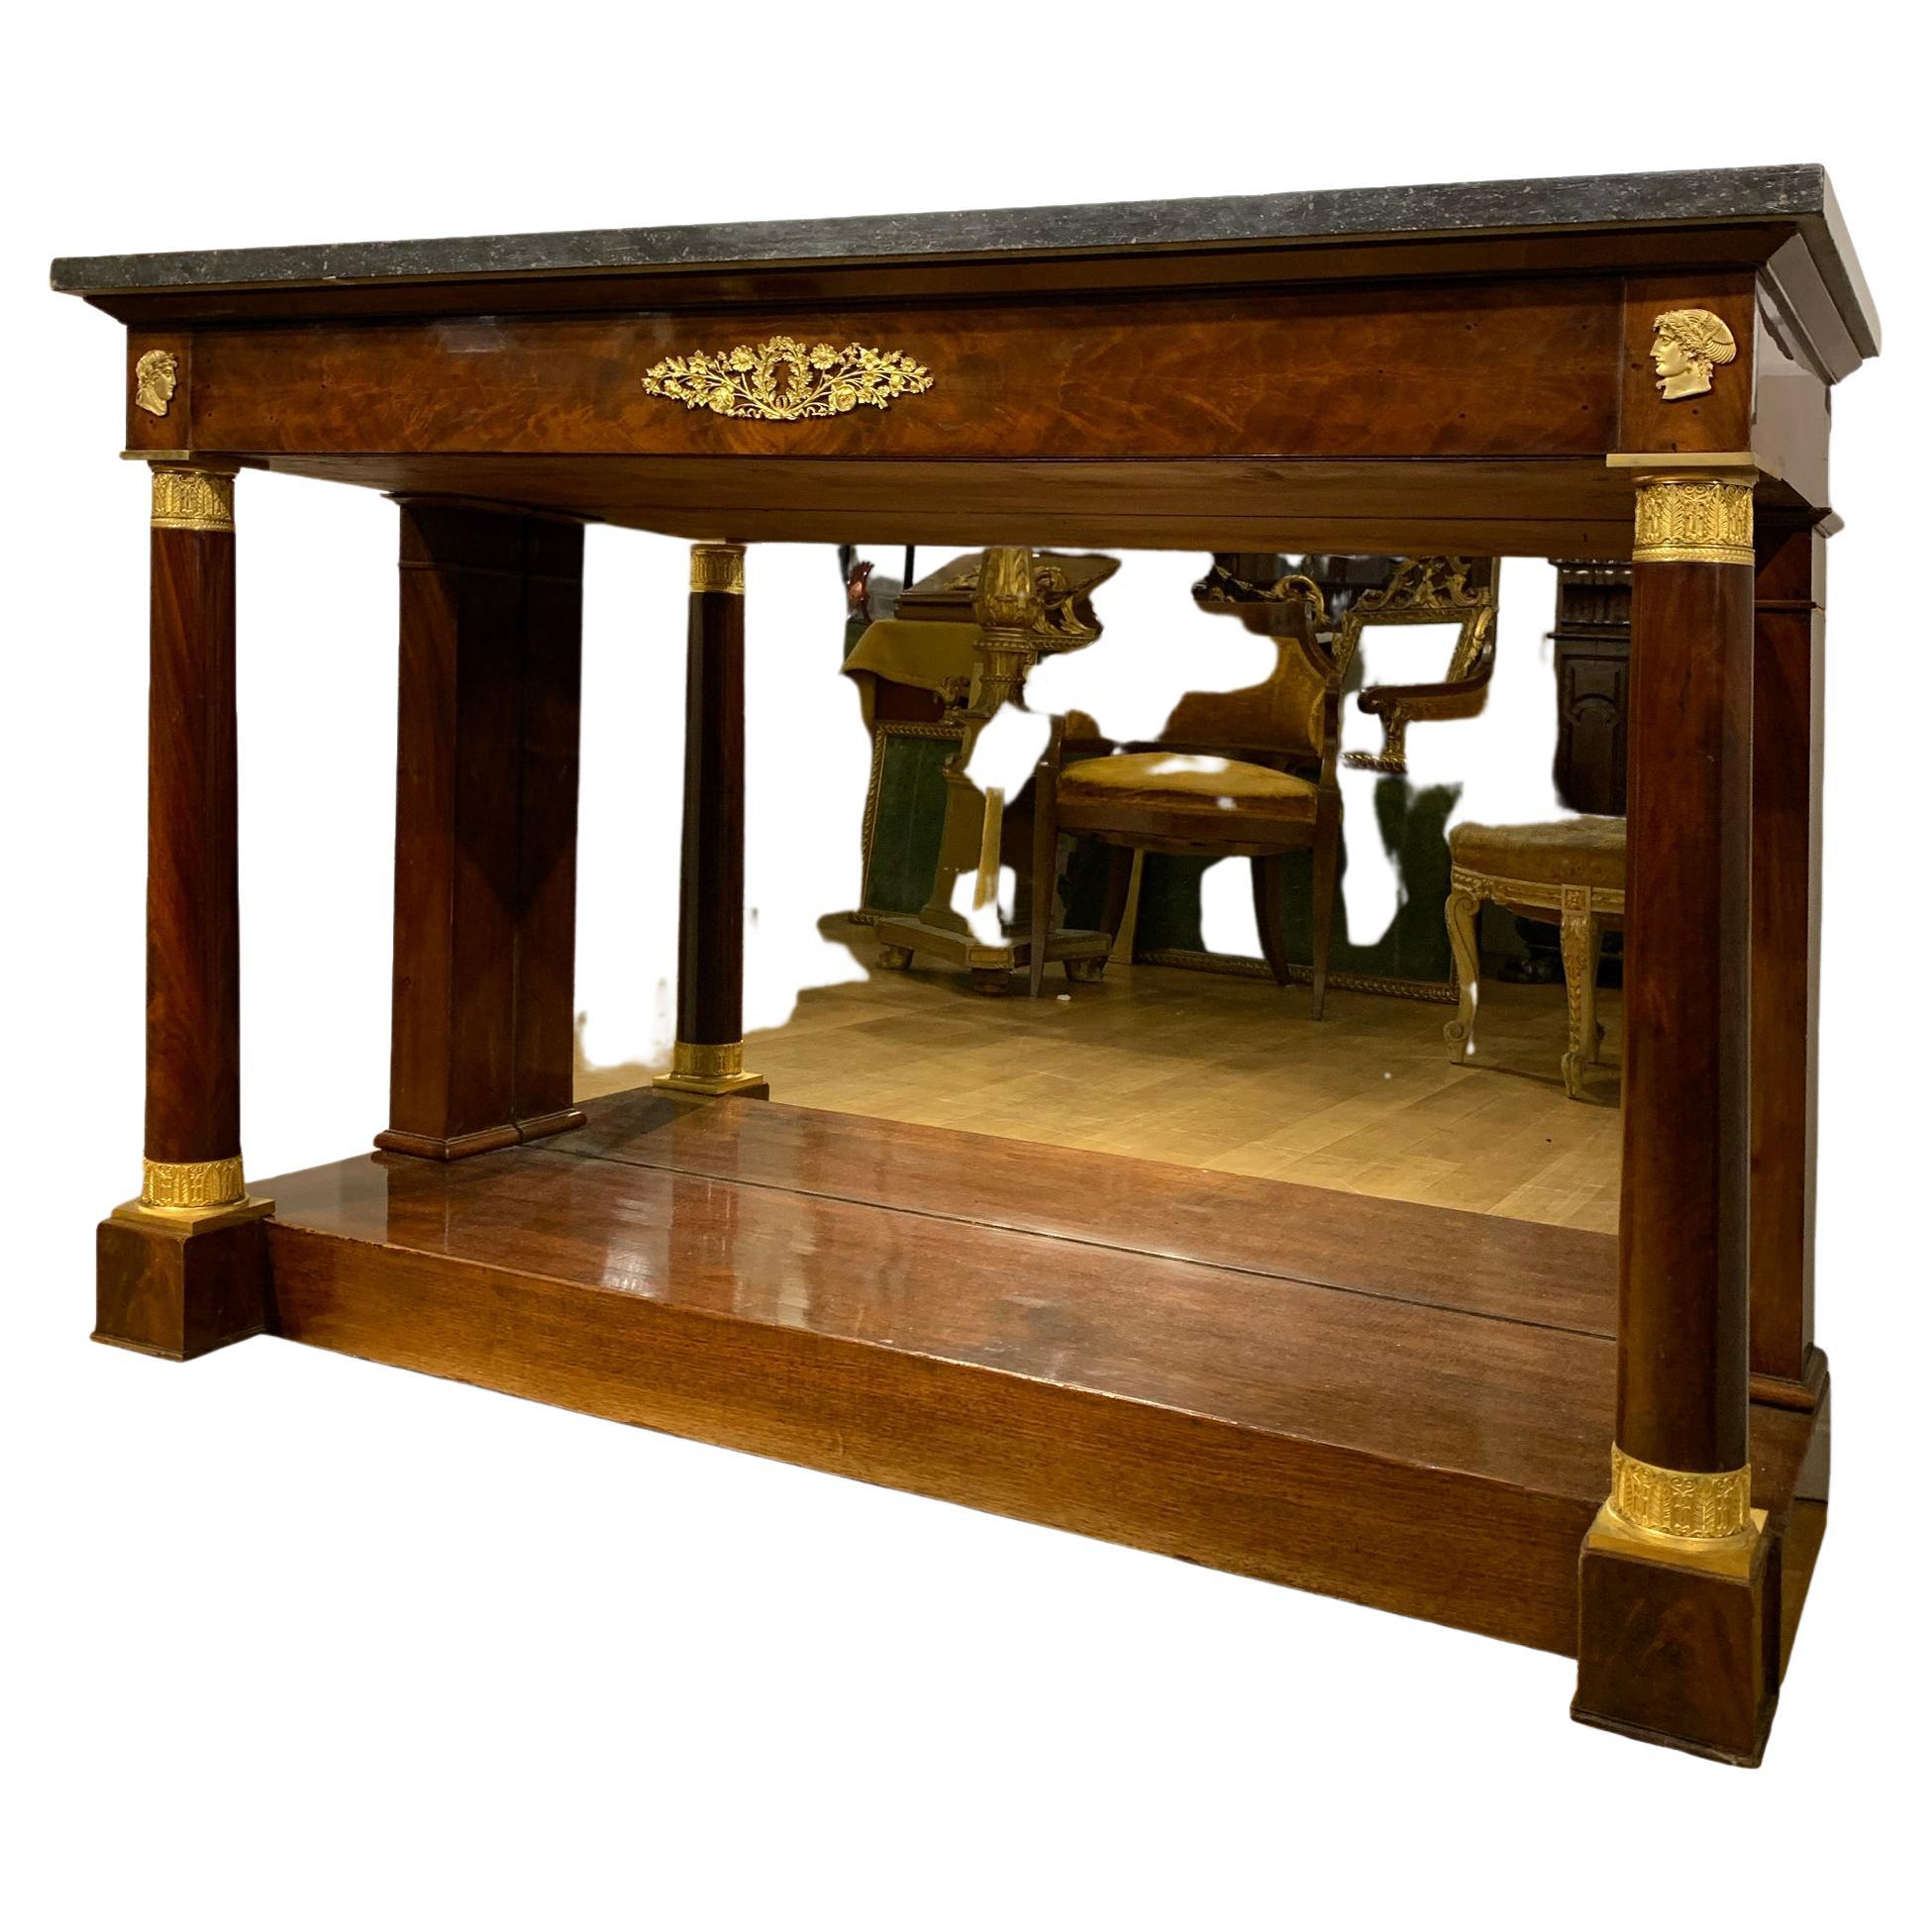 Early 19th Century Mahogany and Bronze Consolle, Louis-françois Bellangé Studio